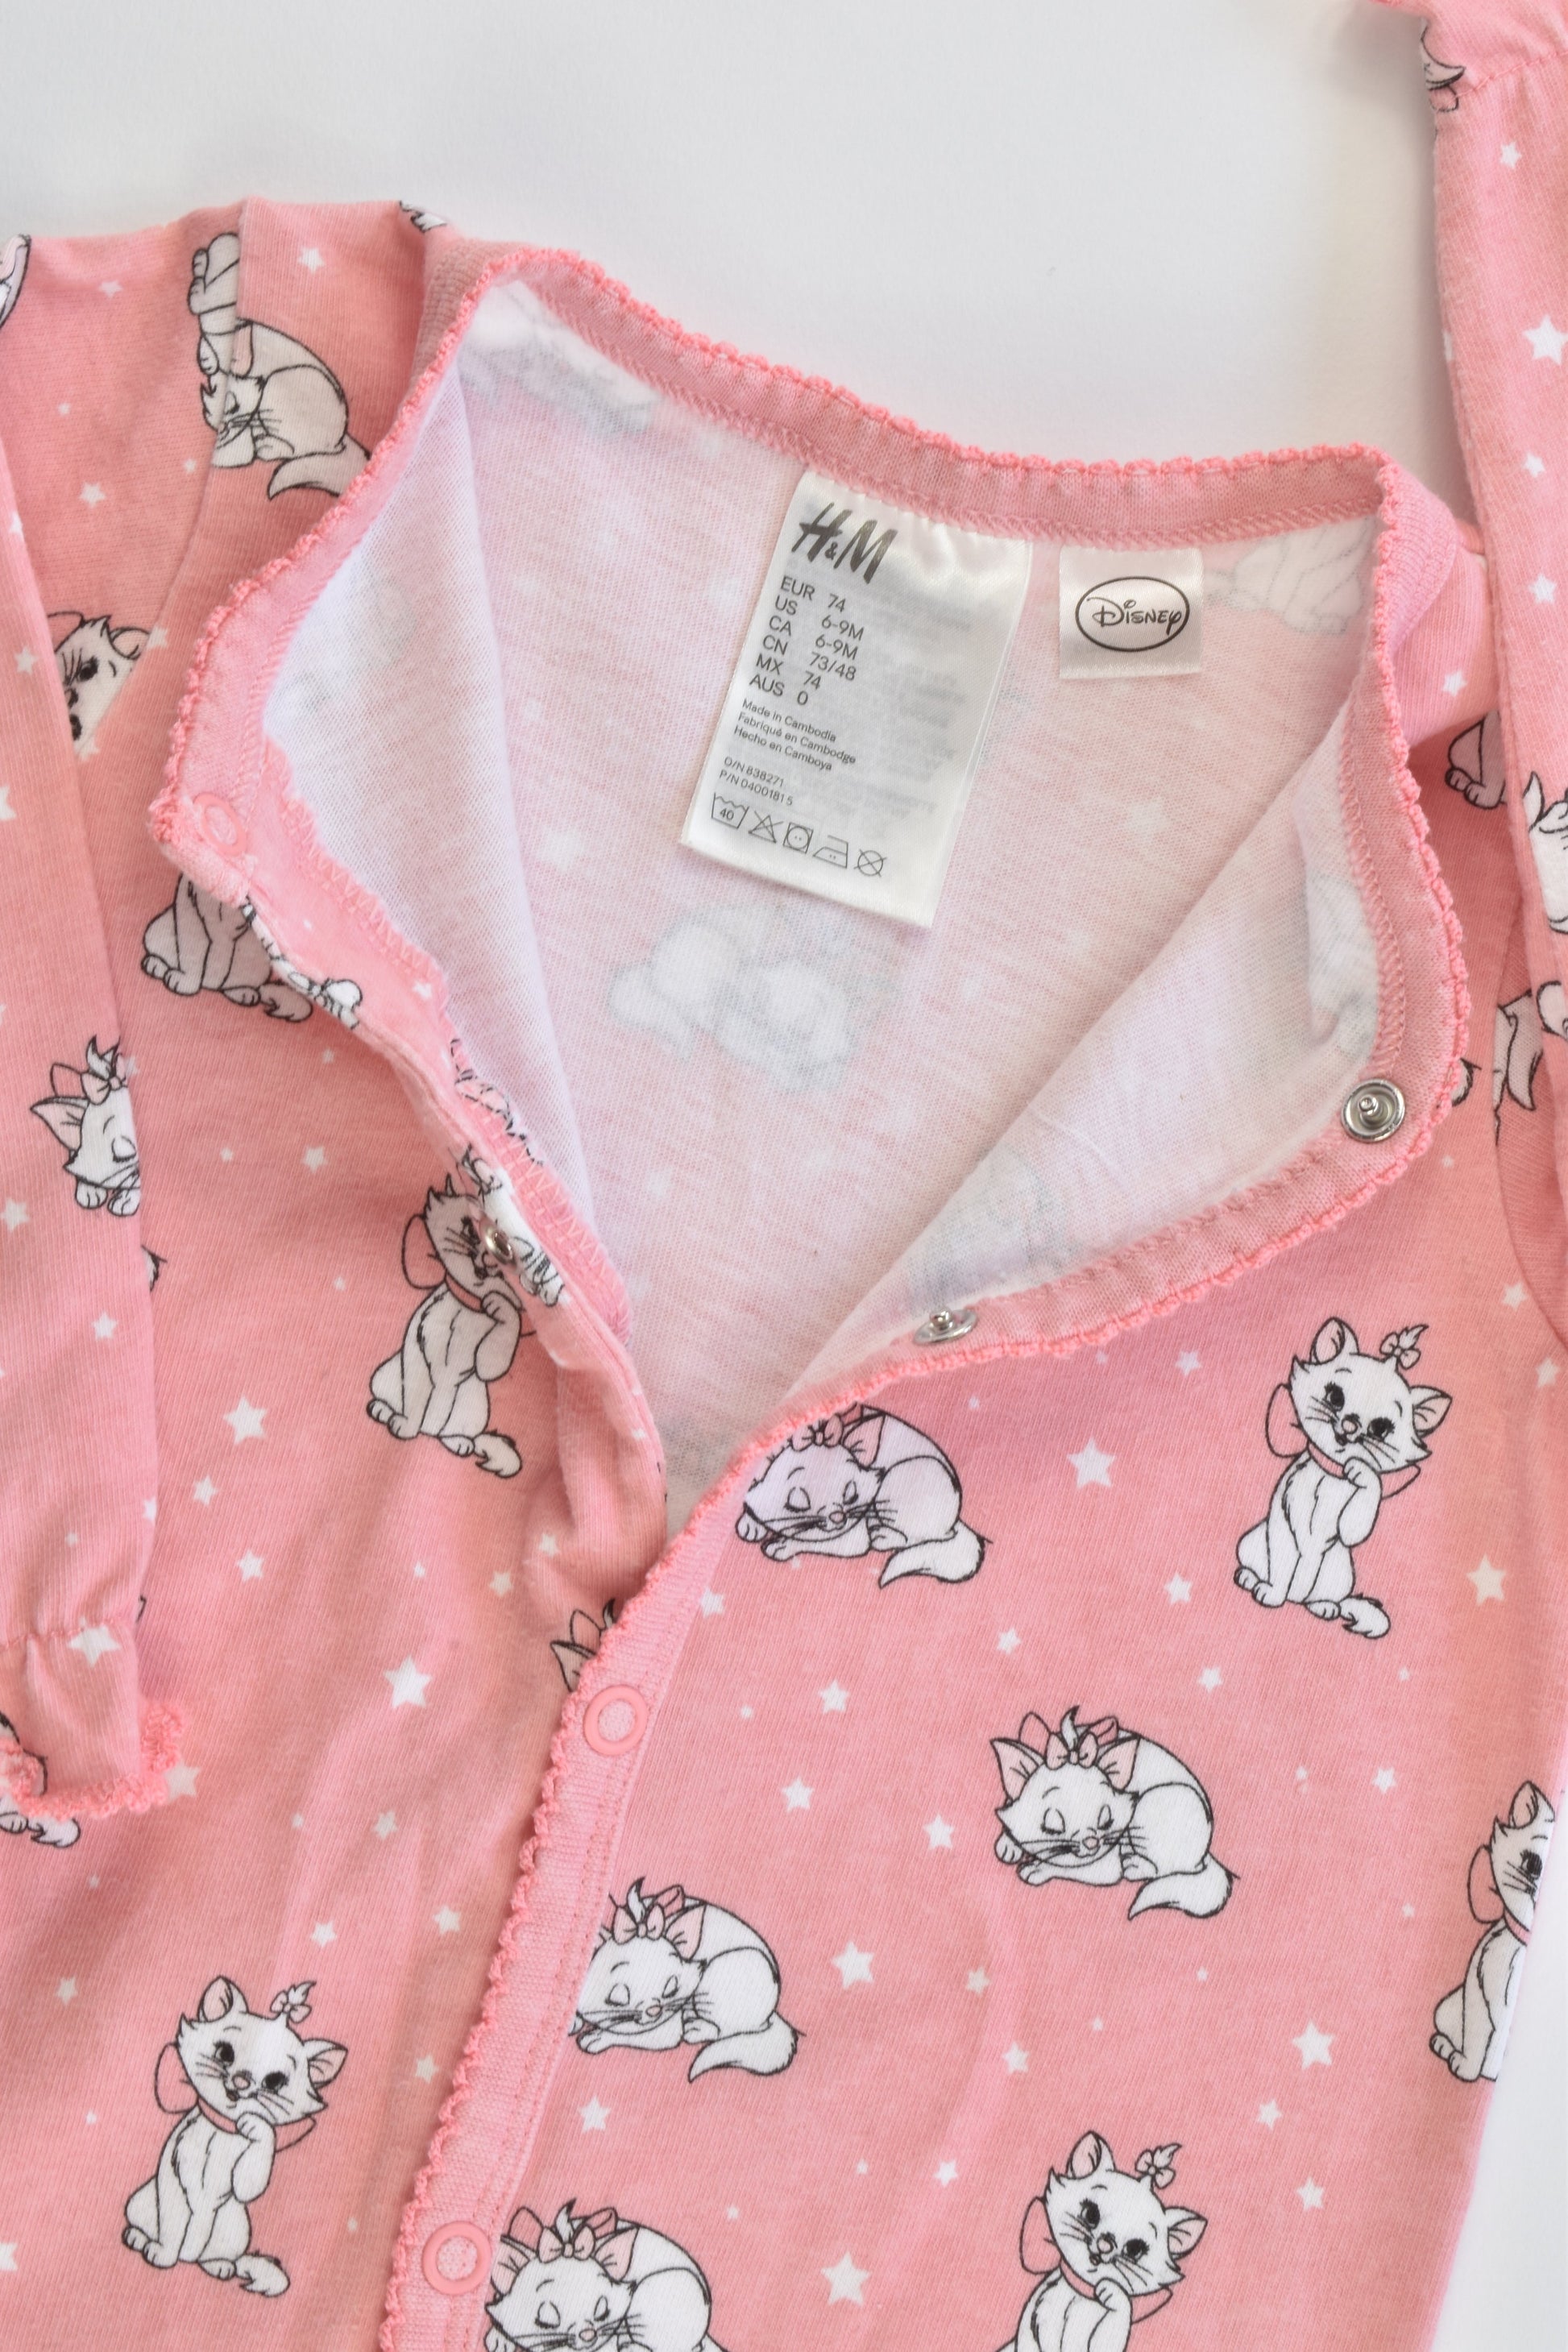 H&M Size 0 (74 cm, 6-9 months) Marie Aristocats Footed Romper